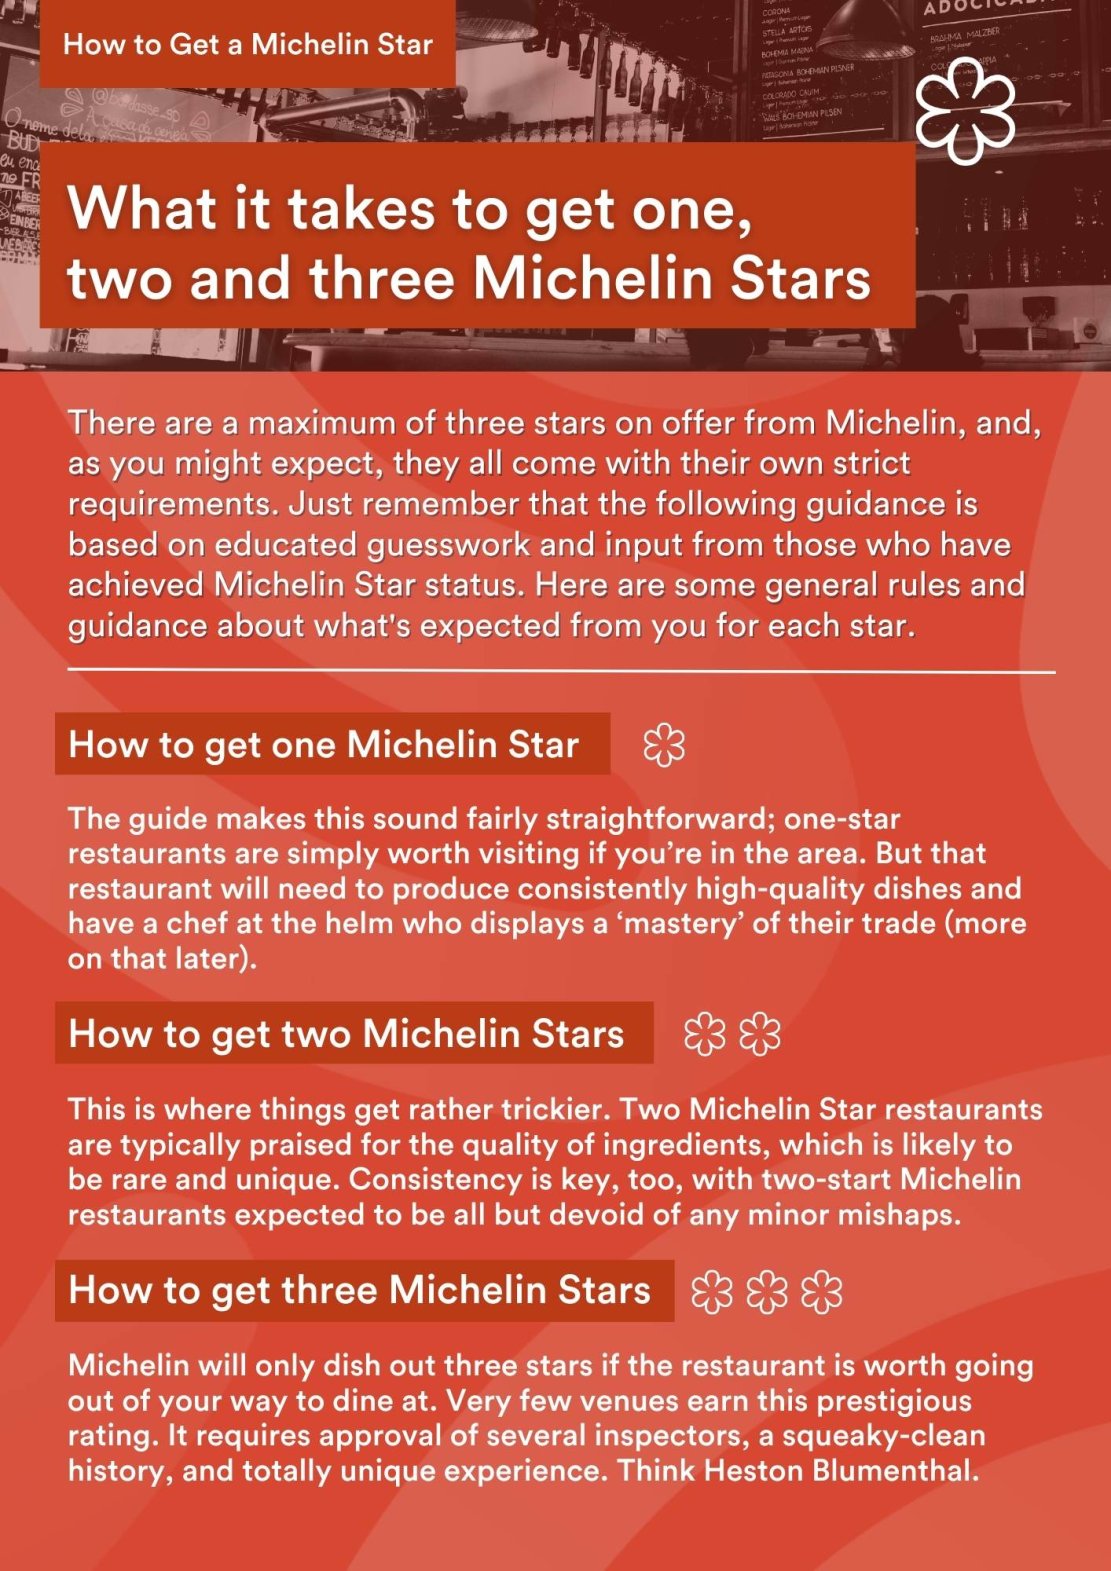 How to Get a Michelin Star